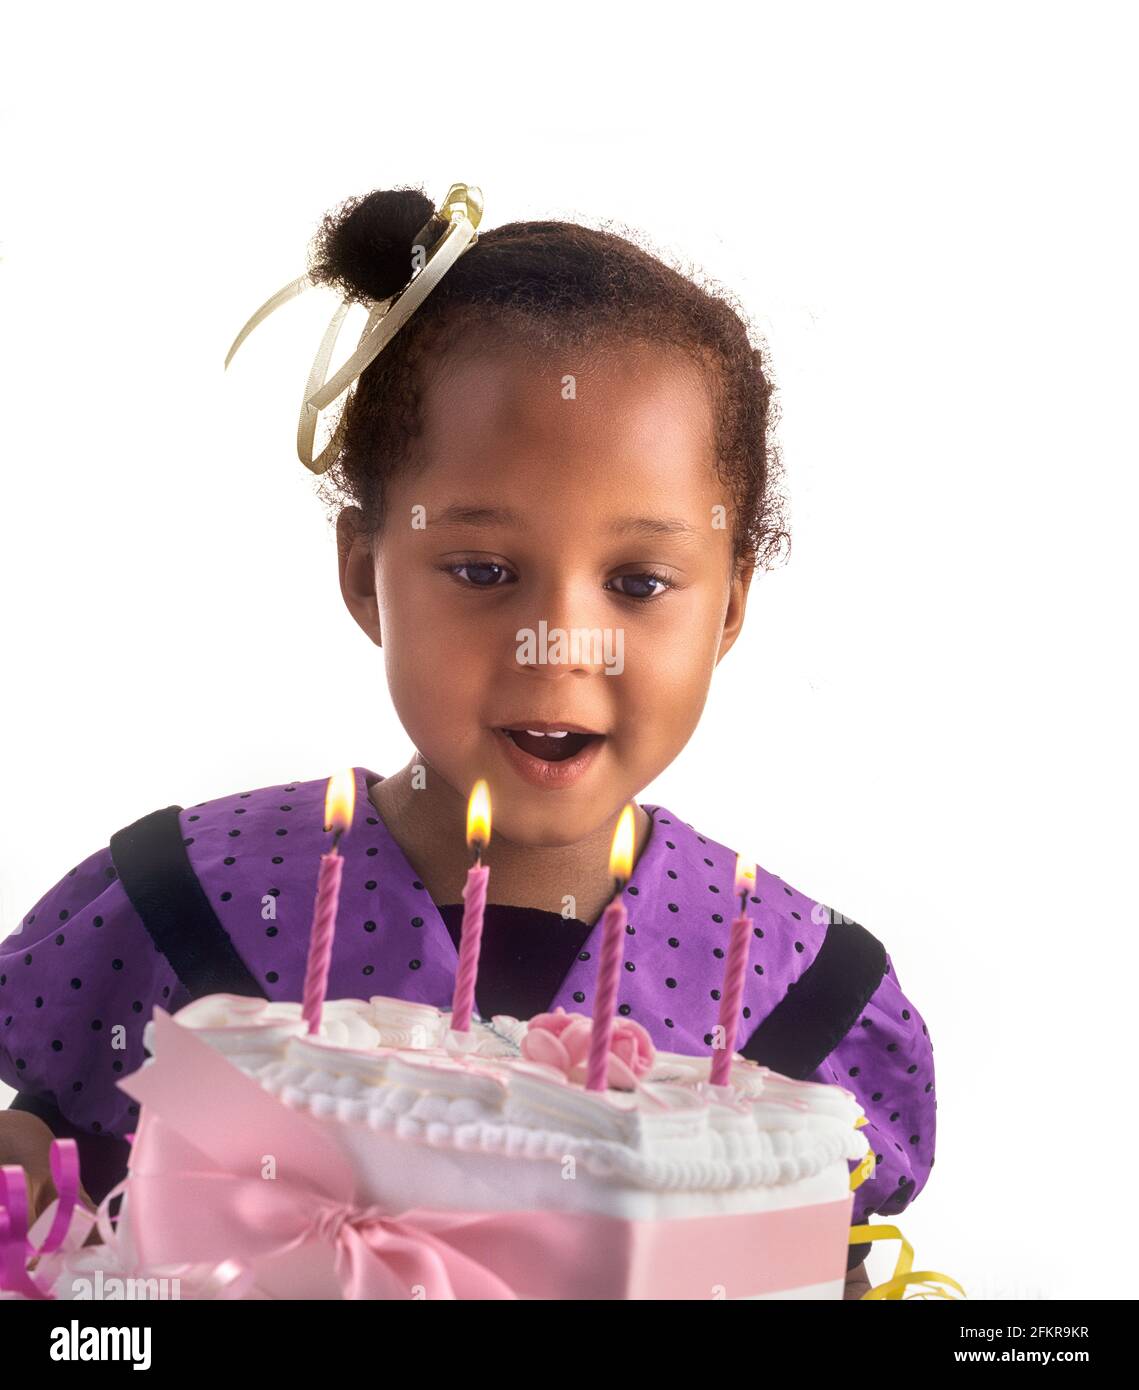 INFANT HAPPY Birthday Cake candles 4 years old cute pretty British African Afro Caribbean girl celebrating with her special birthday cake making a wish about to blow out the four candles, White Cutout background Stock Photo